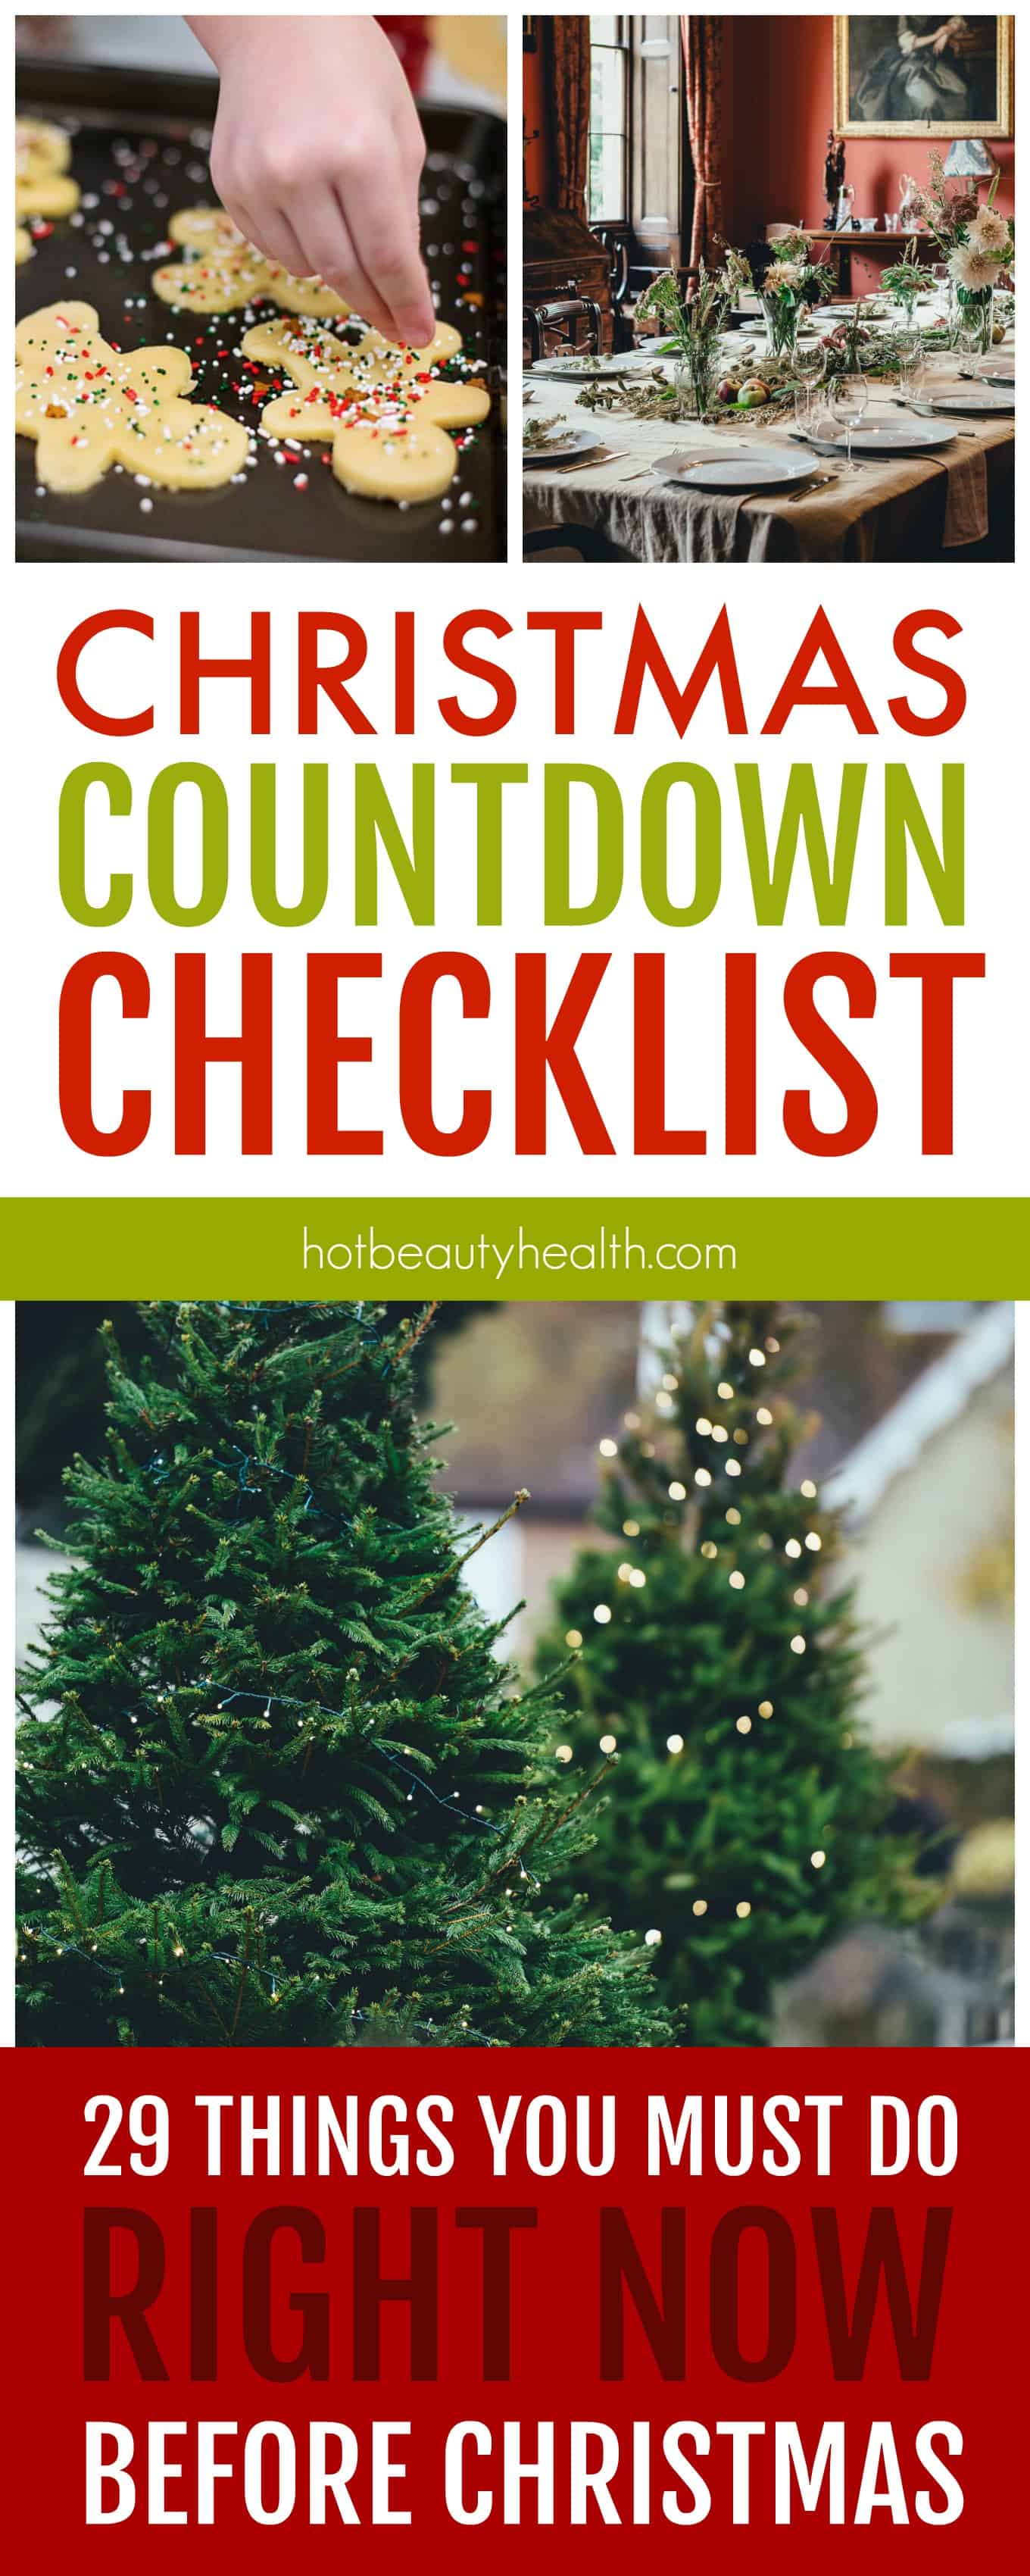 Listed are 29 things you need to do leading up to Christmas. This printable holiday countdown checklist will help you keep track of big tasks and stay organized.